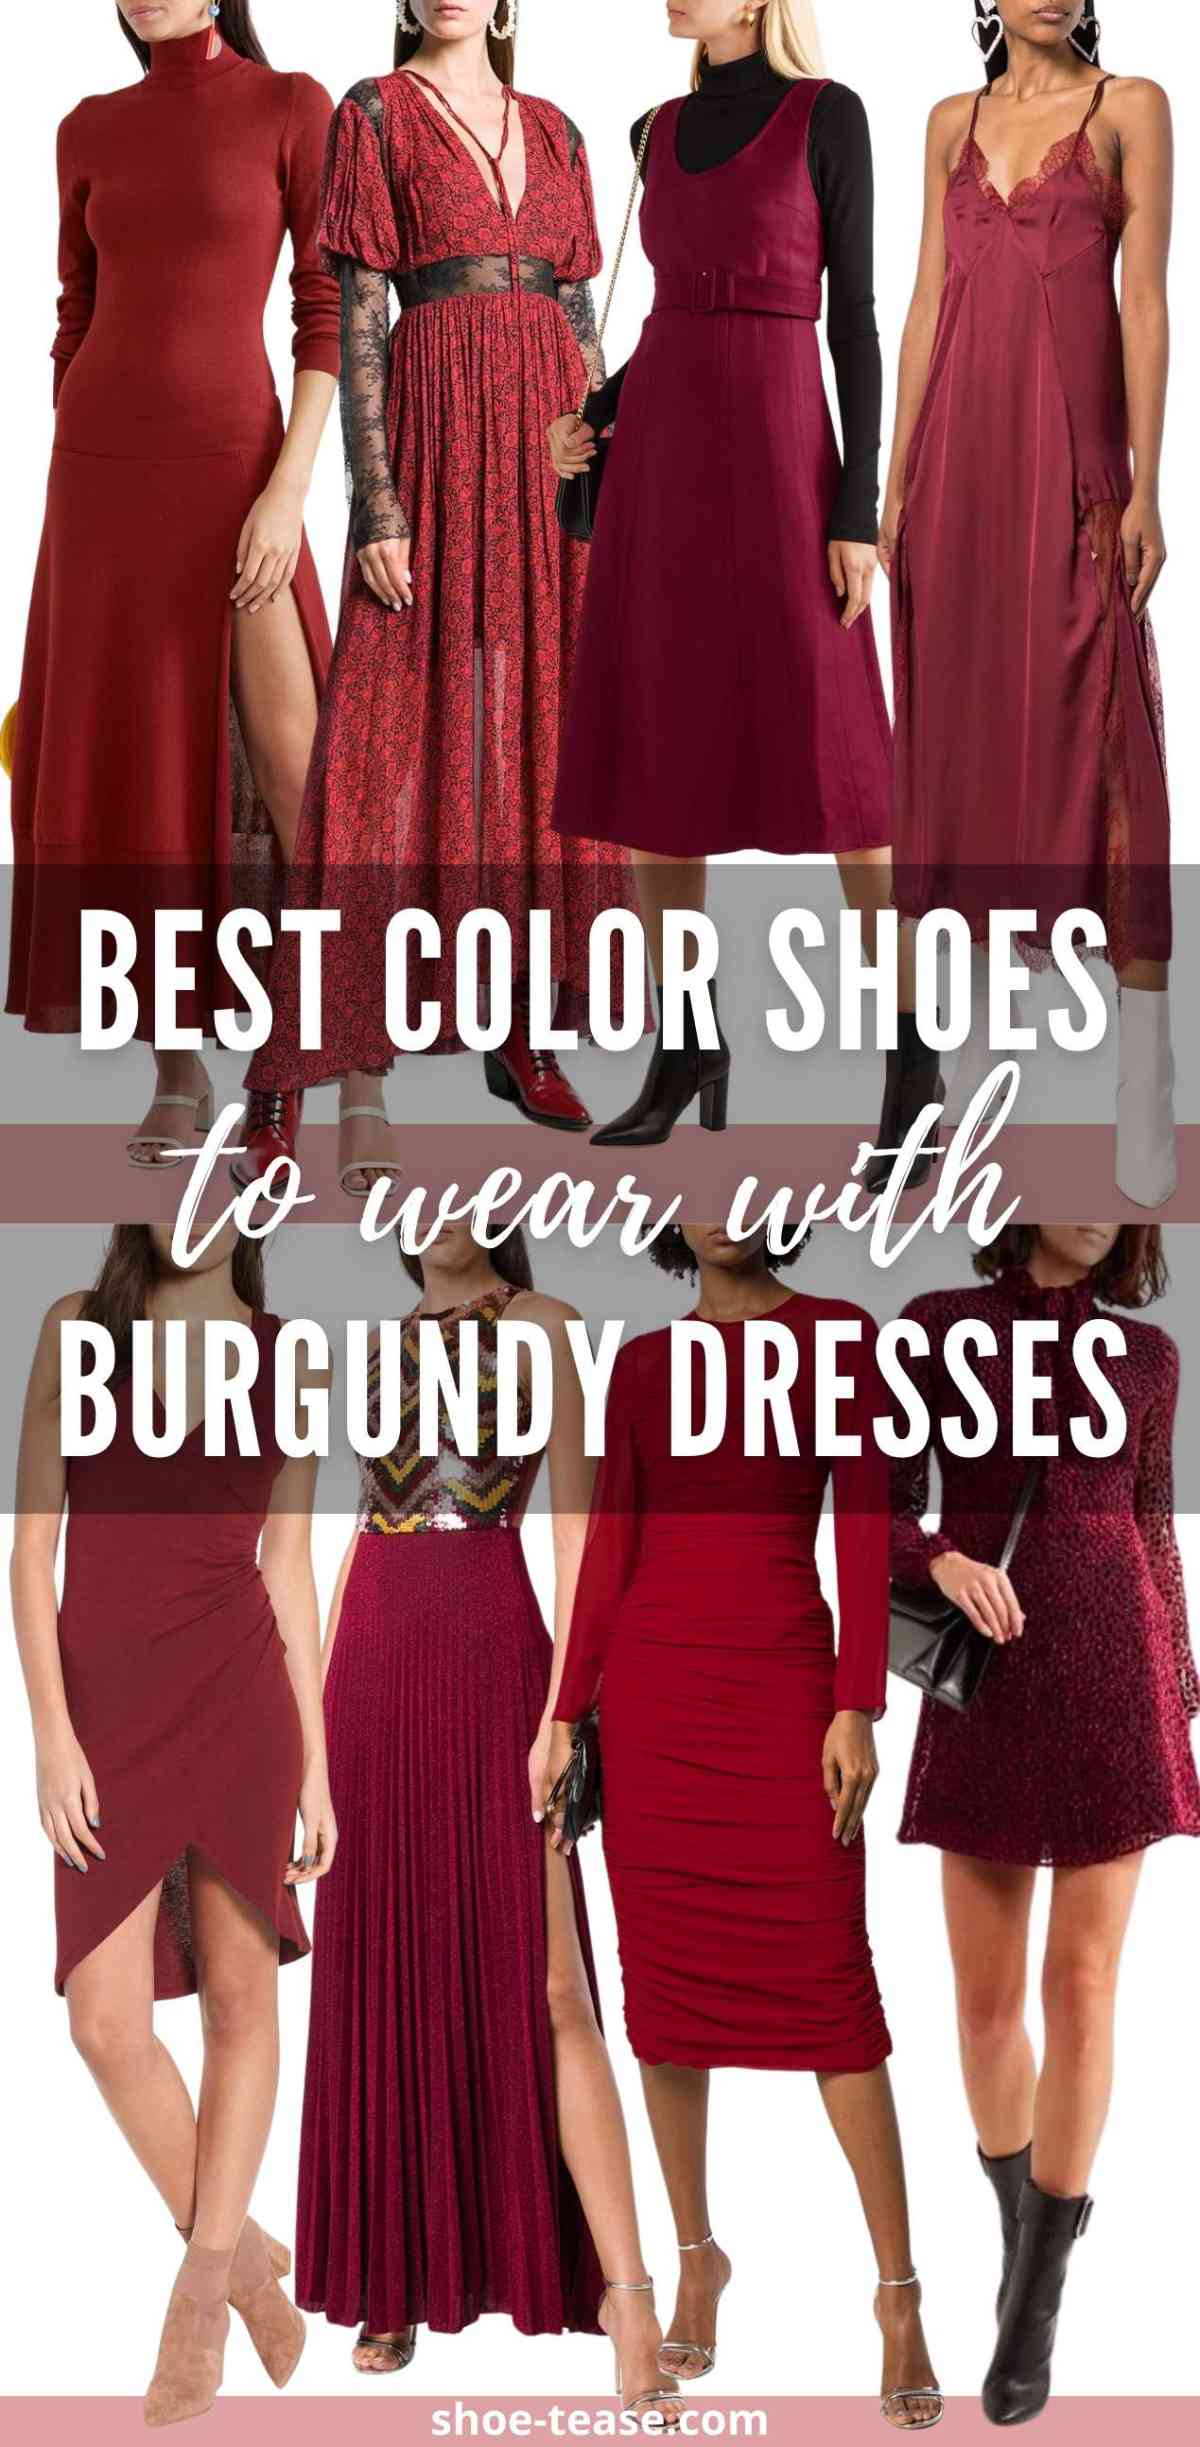 Collage of 8 women wearing different color shoes with burgundy dresses with overlaid text.